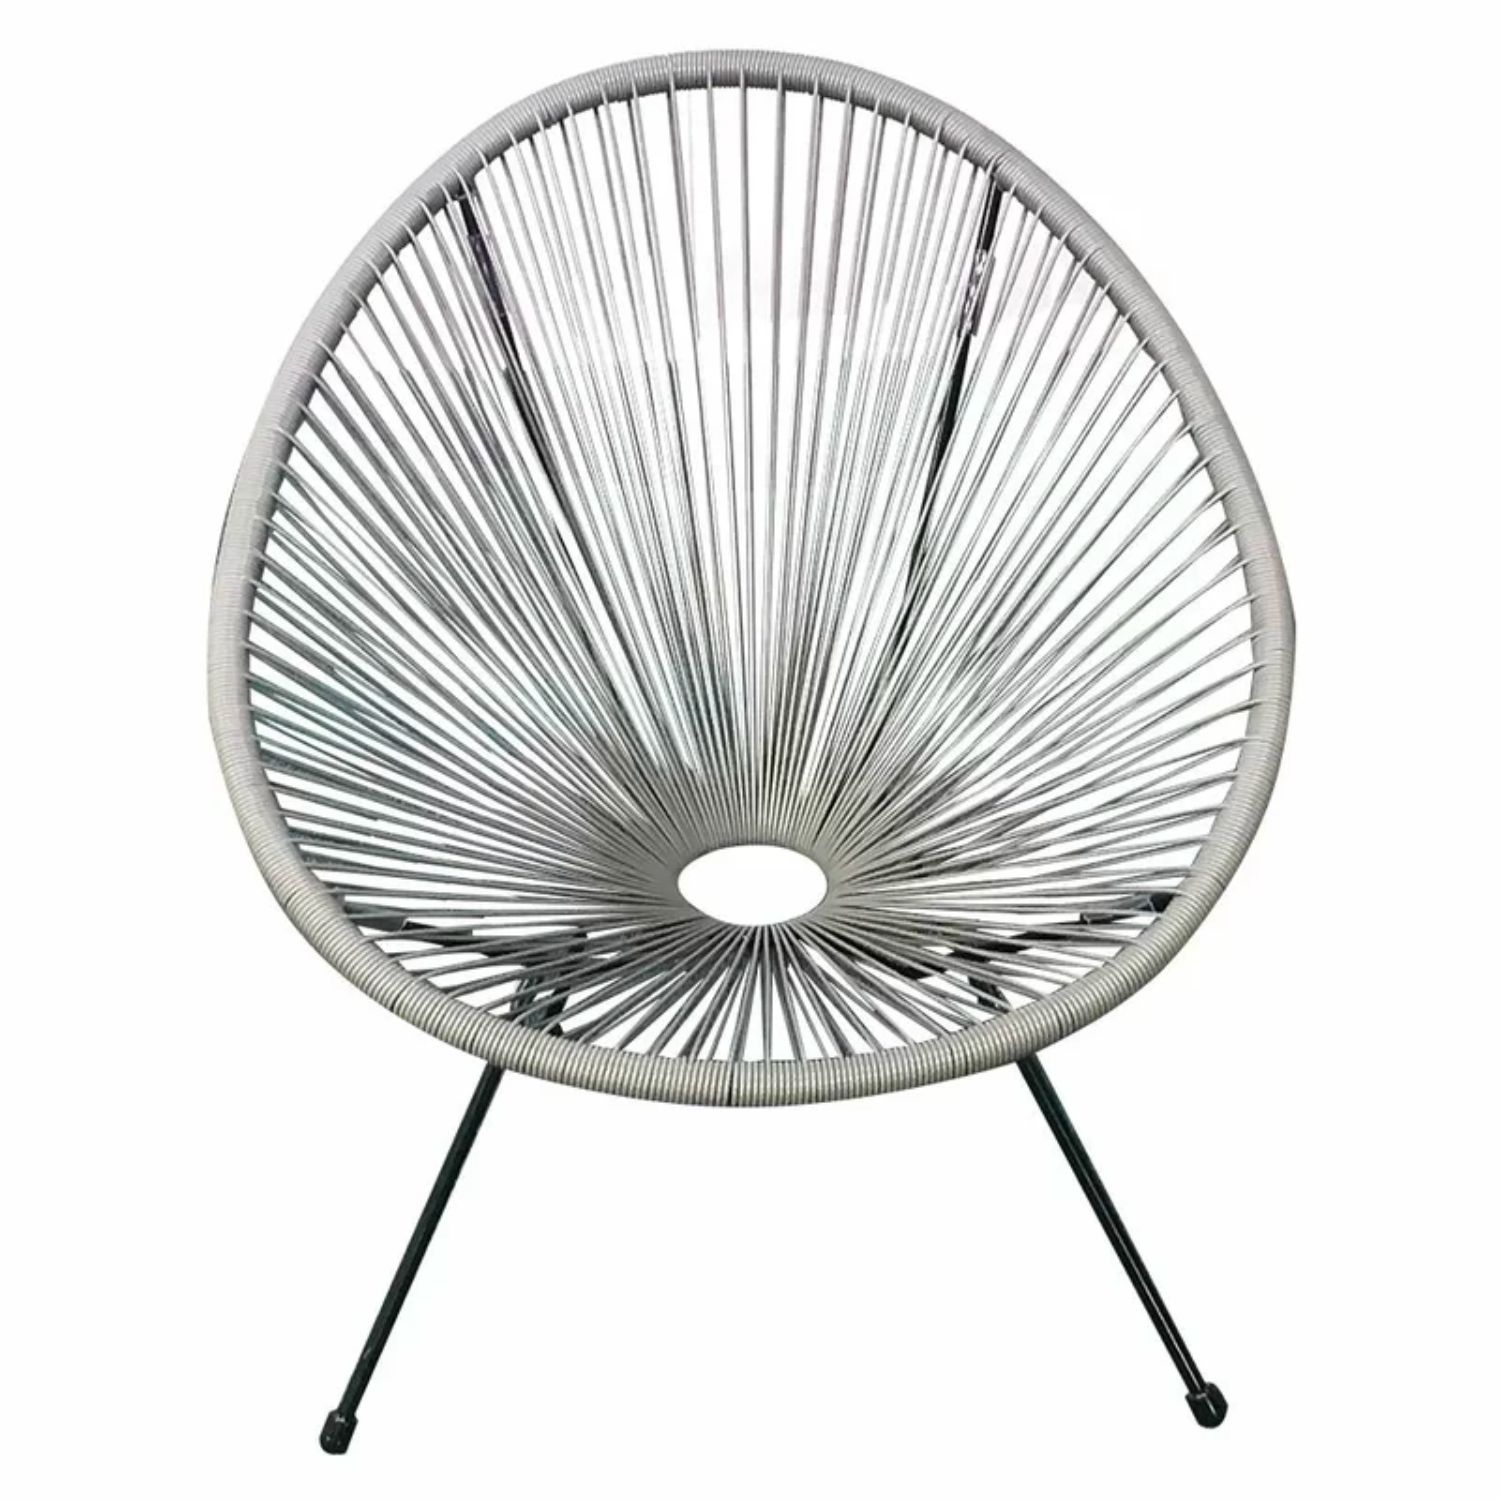 The Best Fire Pit Chairs Option: Papasan Chair